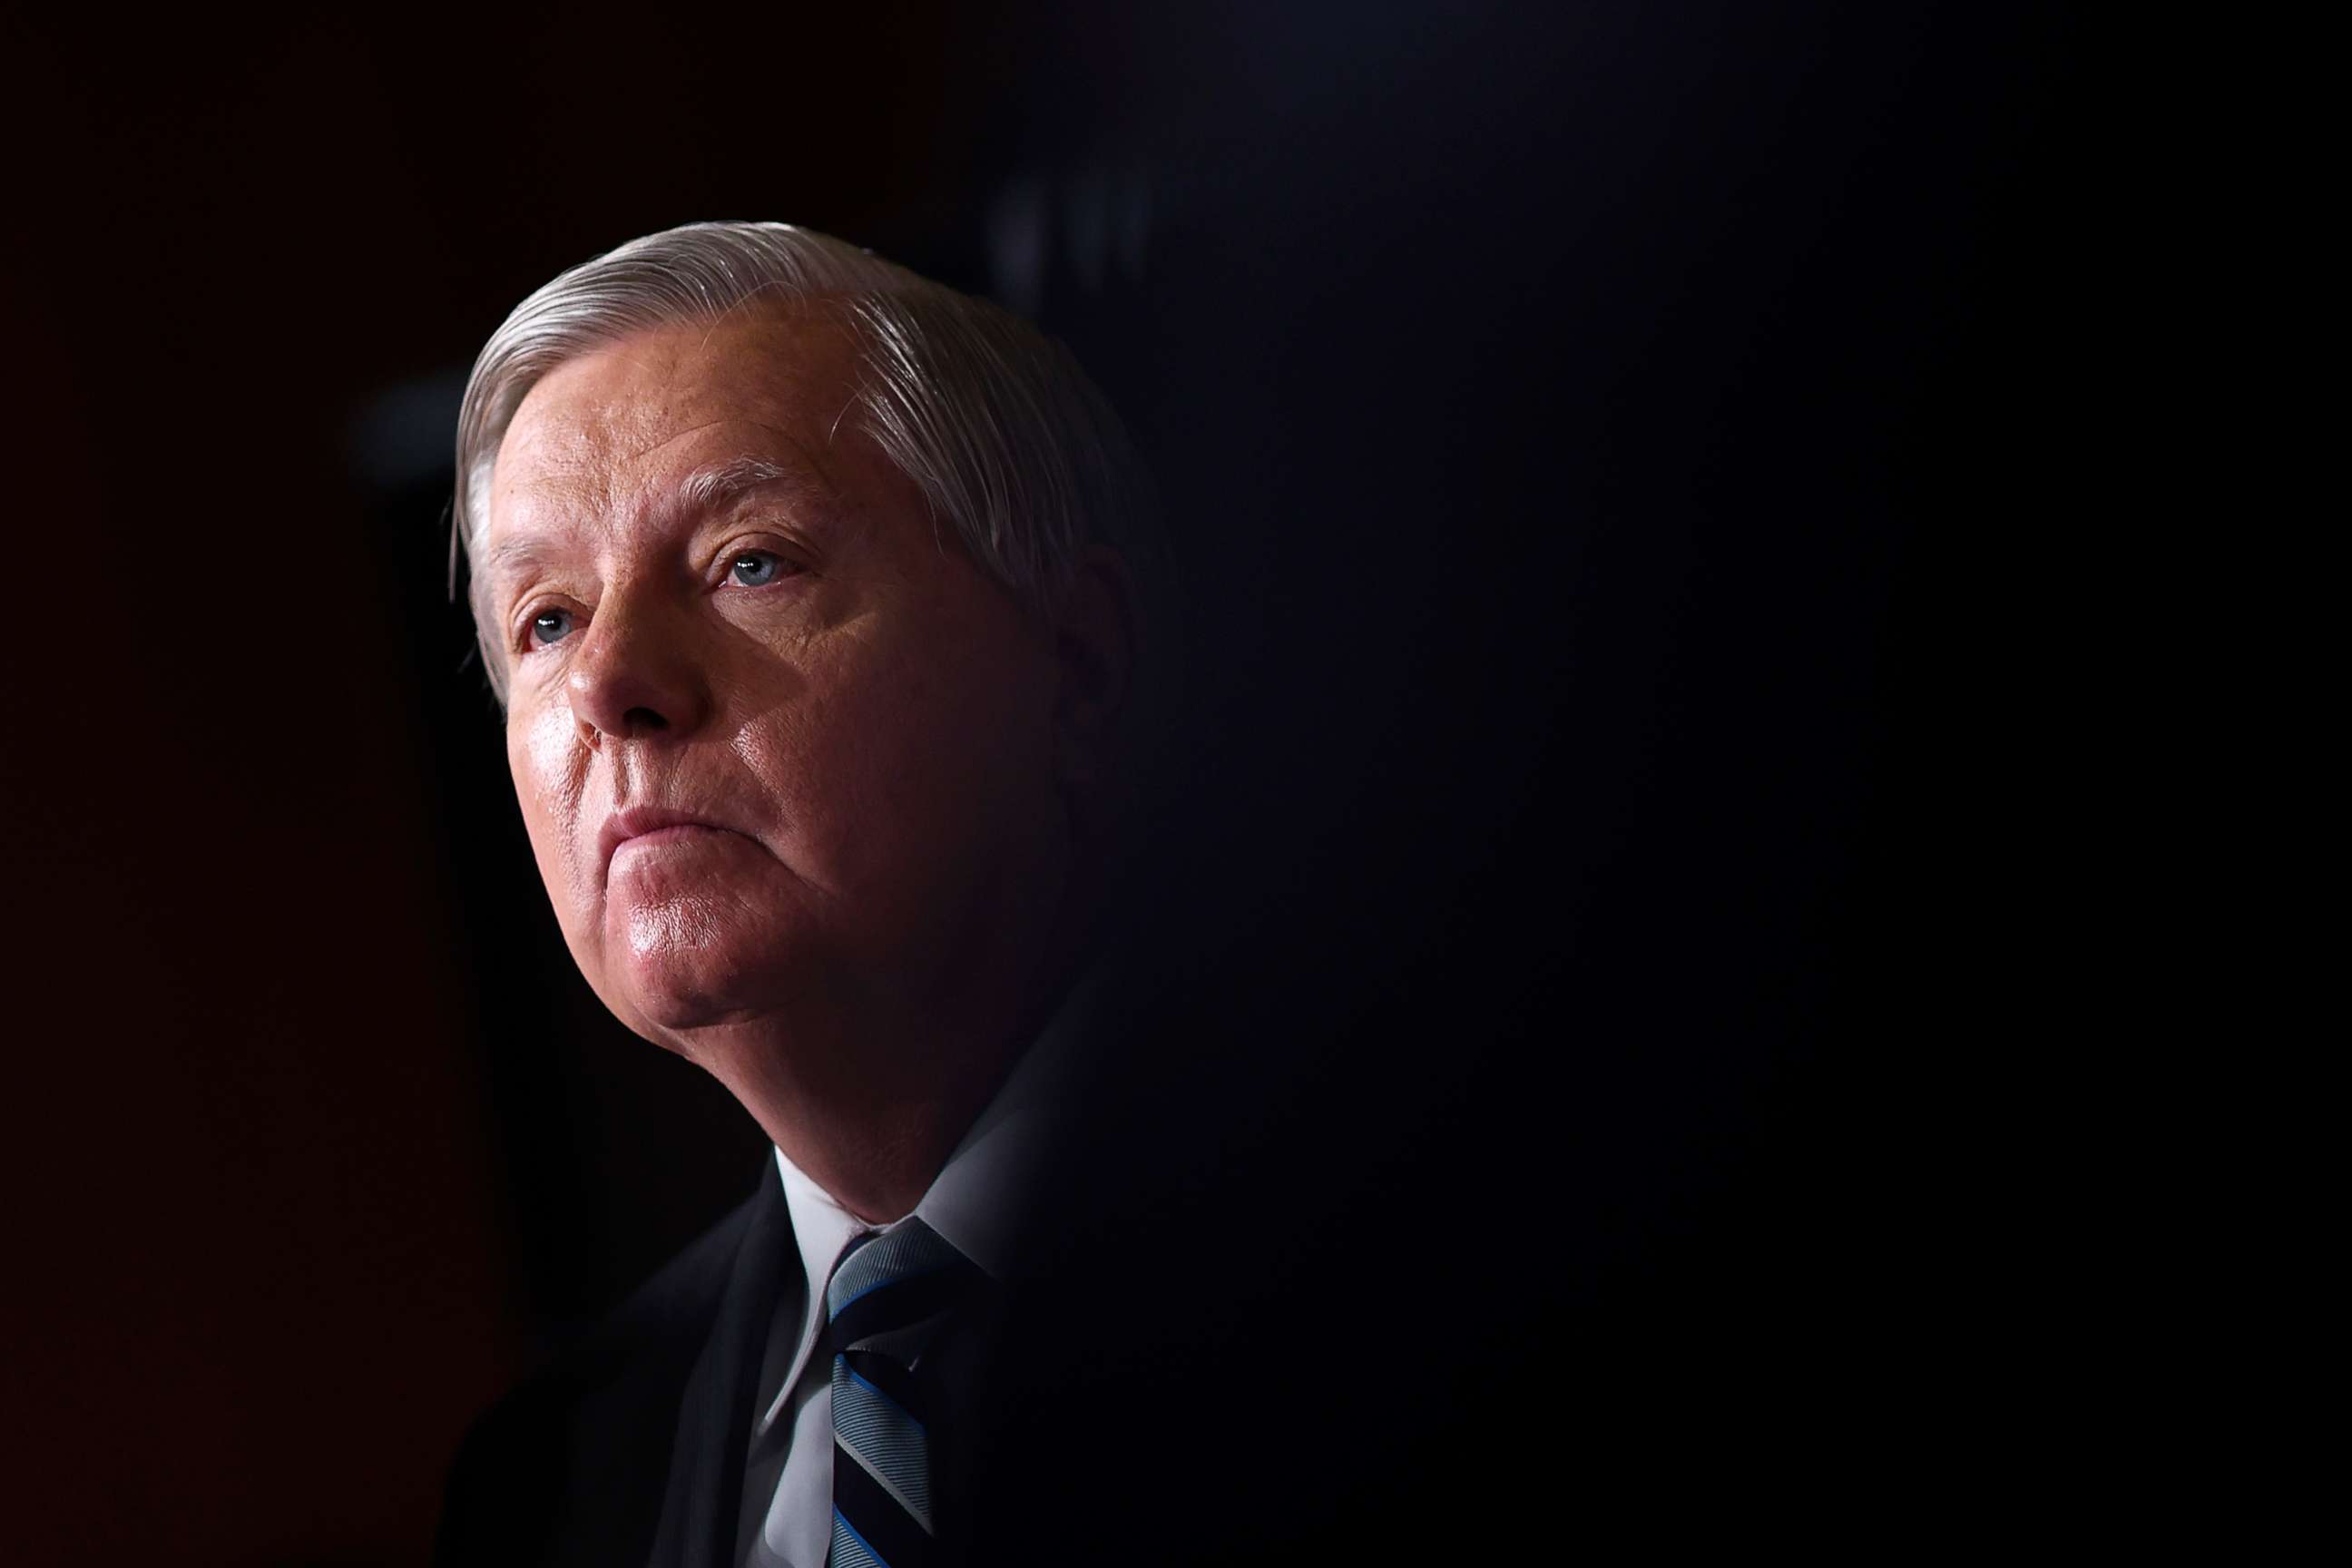 PHOTO: Sen. Lindsey Graham attends a press conference at the U.S. Capitol on Aug. 5, 2022, in Washington, D.C.